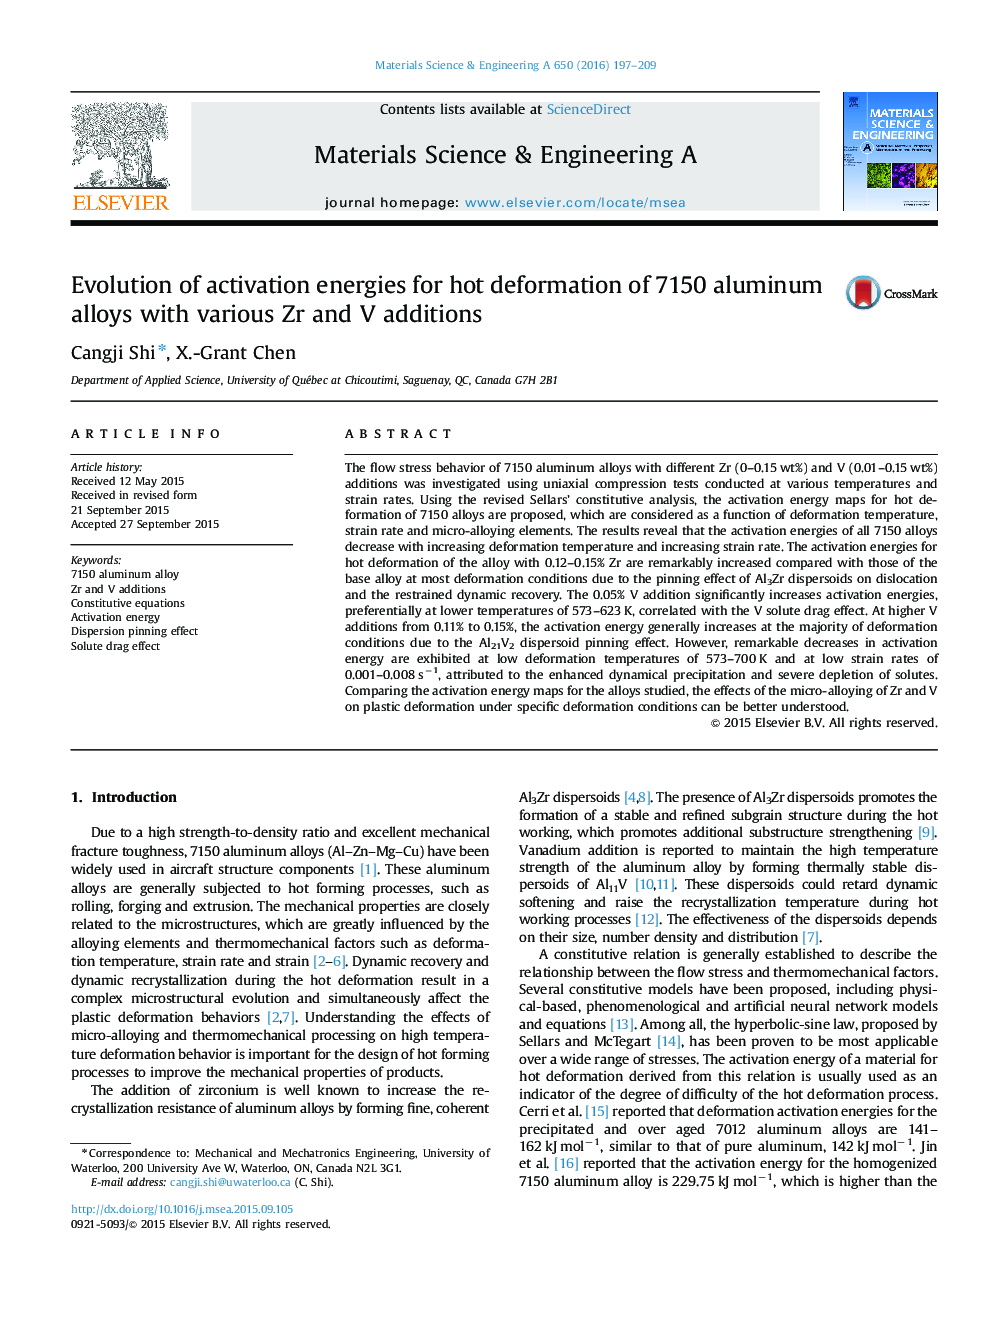 Evolution of activation energies for hot deformation of 7150 aluminum alloys with various Zr and V additions